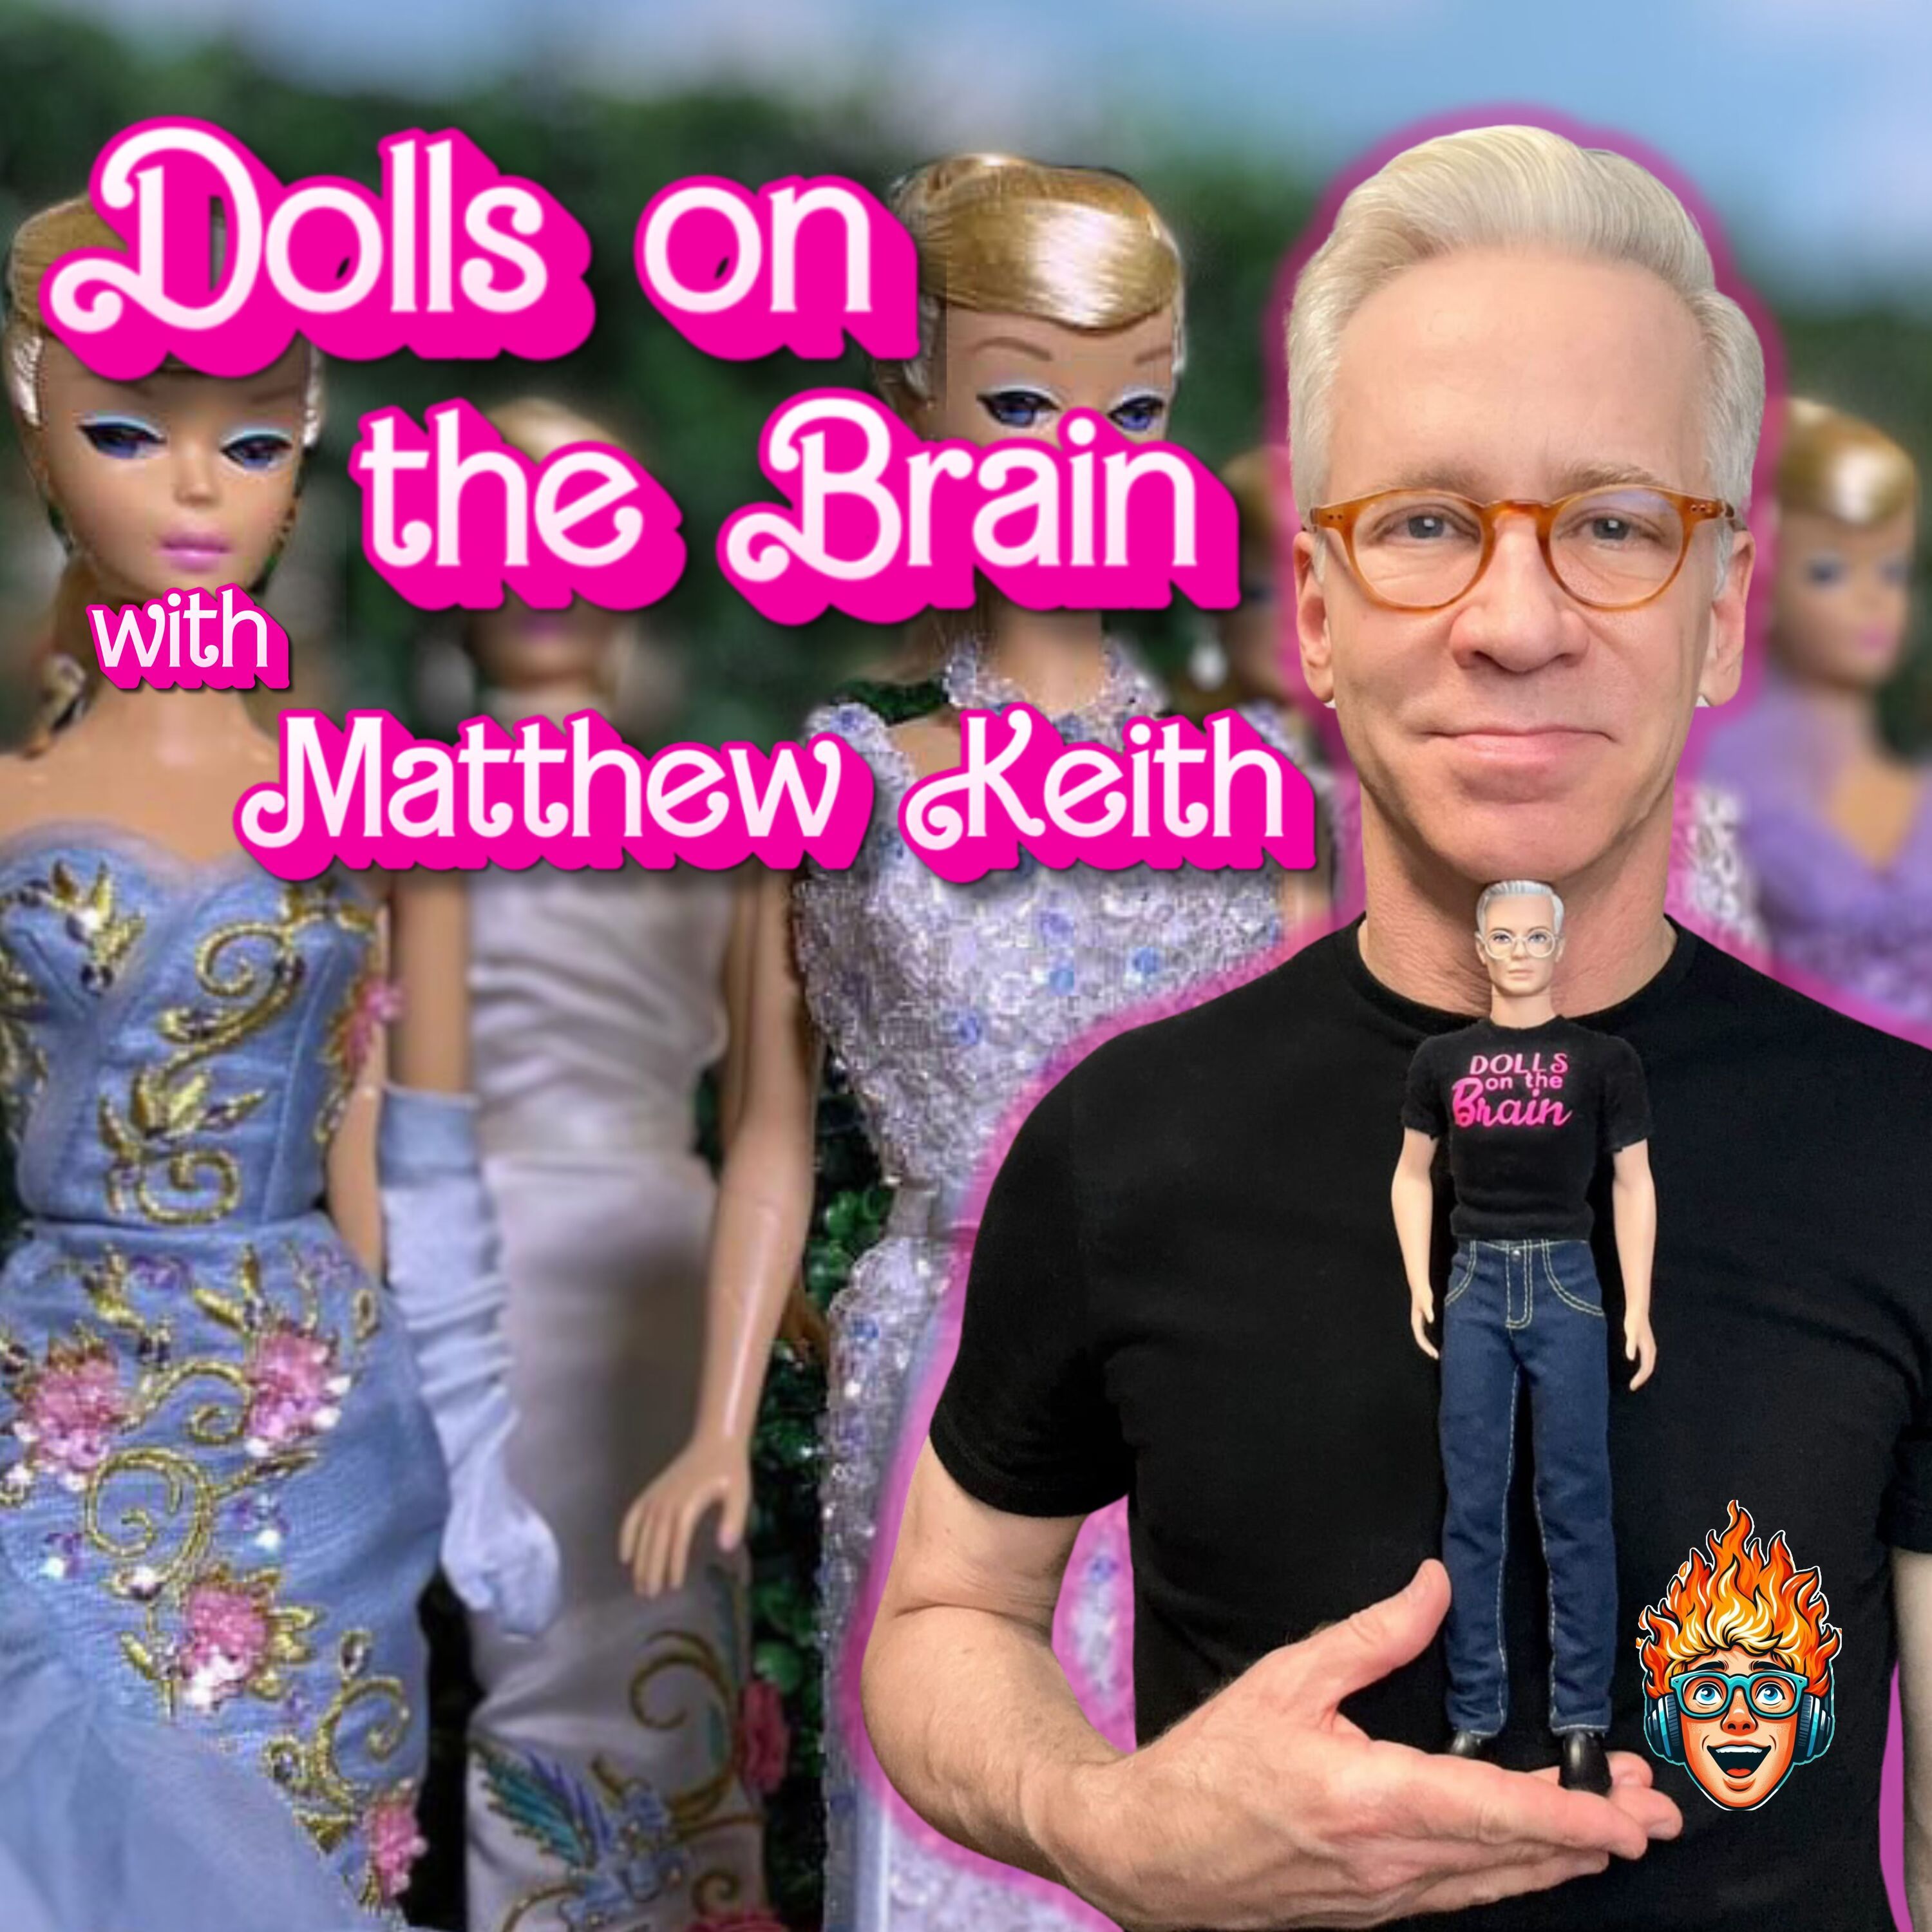 What can dolls tell us about ourselves? with Matthew Keith